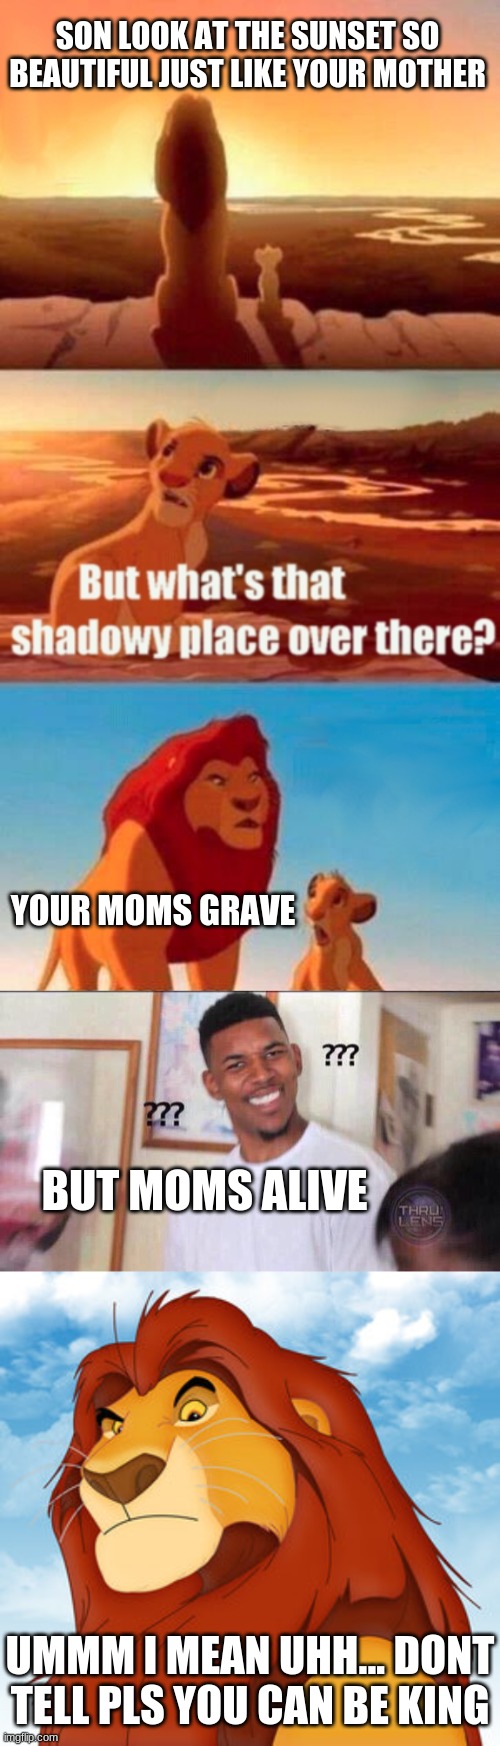 SON LOOK AT THE SUNSET SO BEAUTIFUL JUST LIKE YOUR MOTHER; YOUR MOMS GRAVE; BUT MOMS ALIVE; UMMM I MEAN UHH... DONT TELL PLS YOU CAN BE KING | image tagged in memes,simba shadowy place,black guy confused,mufasa | made w/ Imgflip meme maker